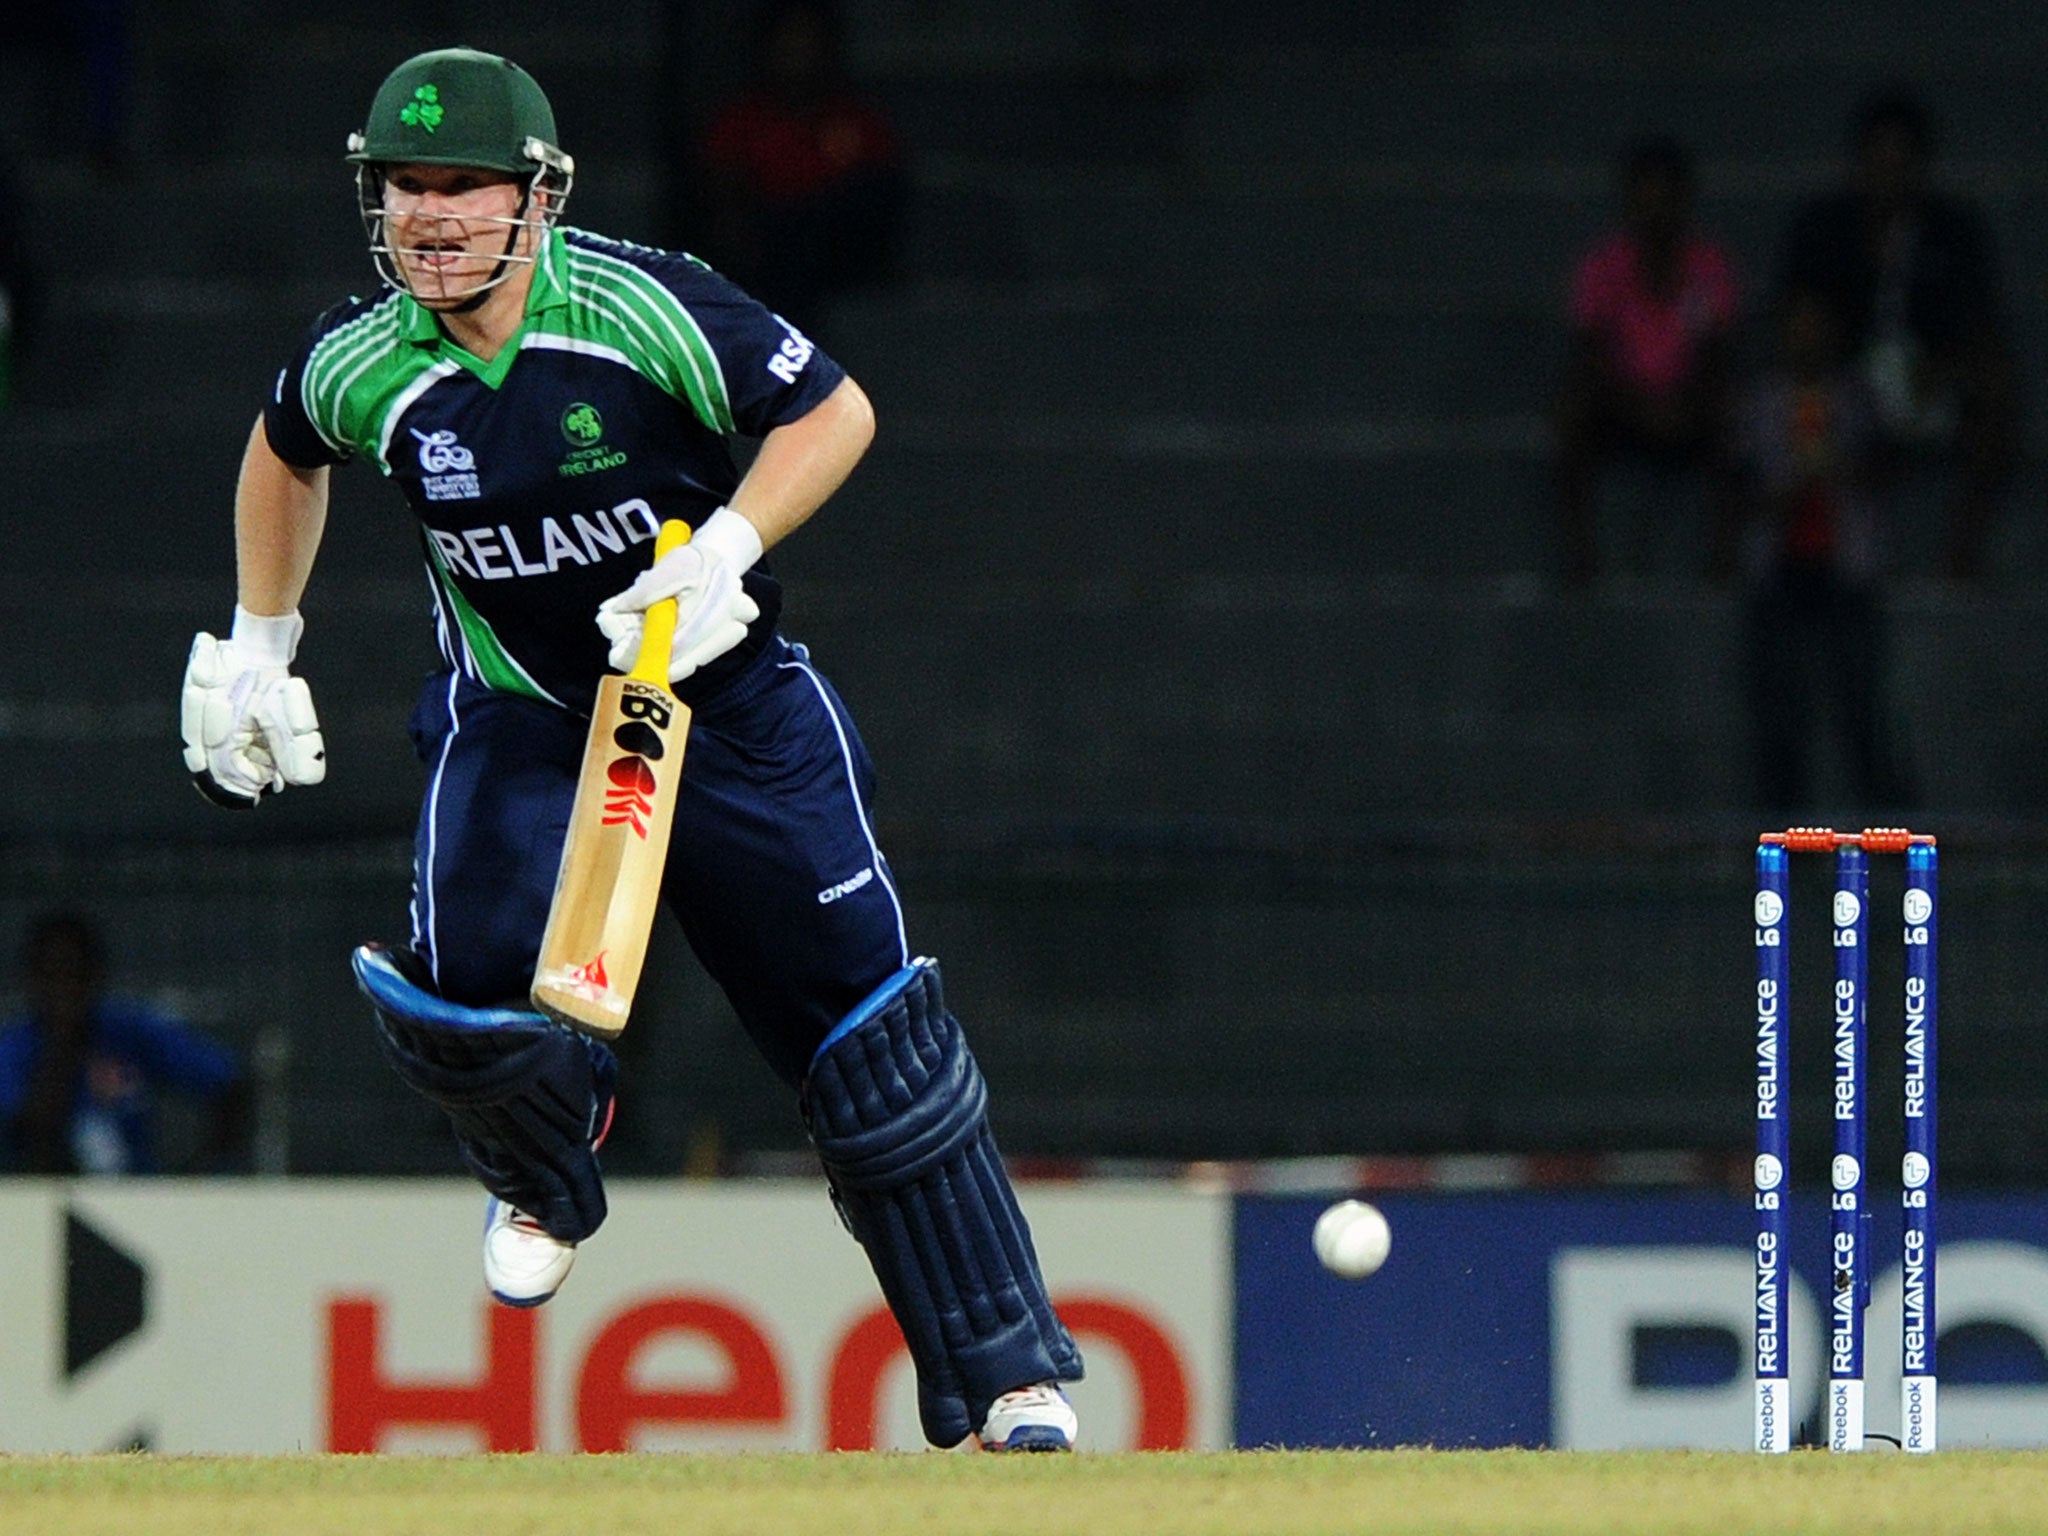 Ireland cricketer Paul Stirling runs between the wickets during the ICC Twenty20 Cricket World Cup match between West Indies and Ireland